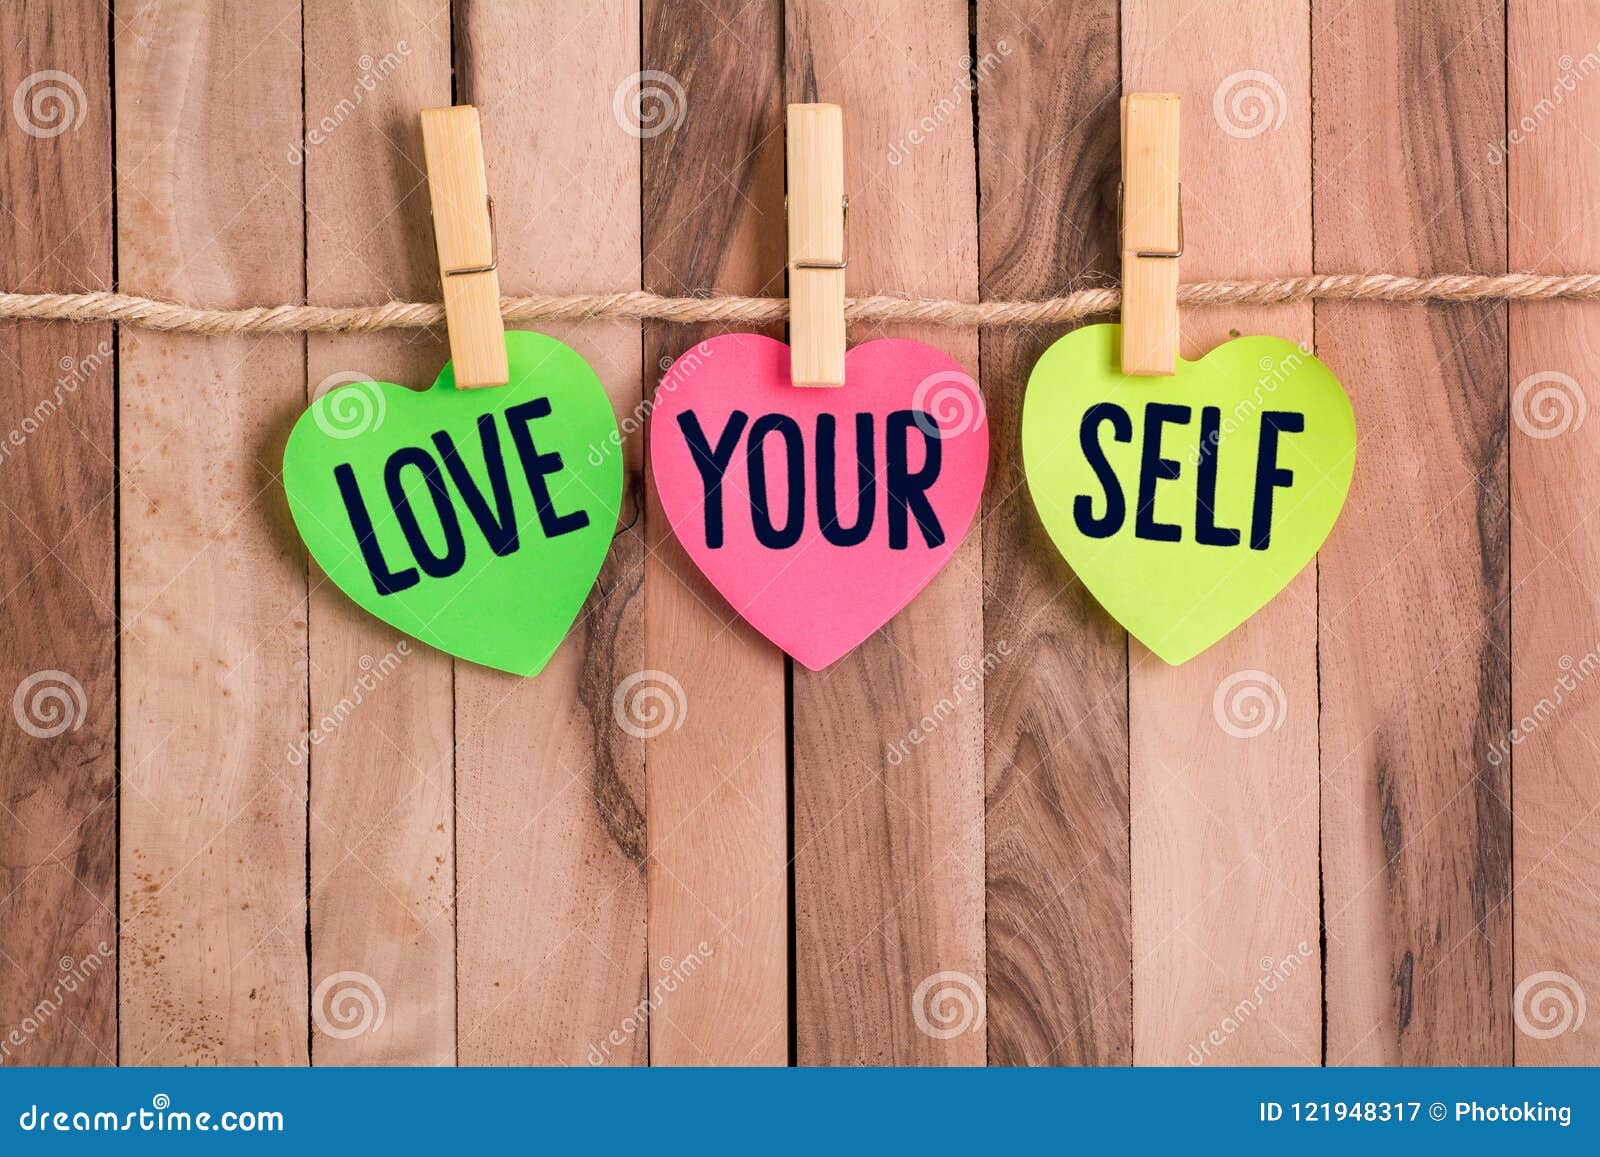 love your self heart d note